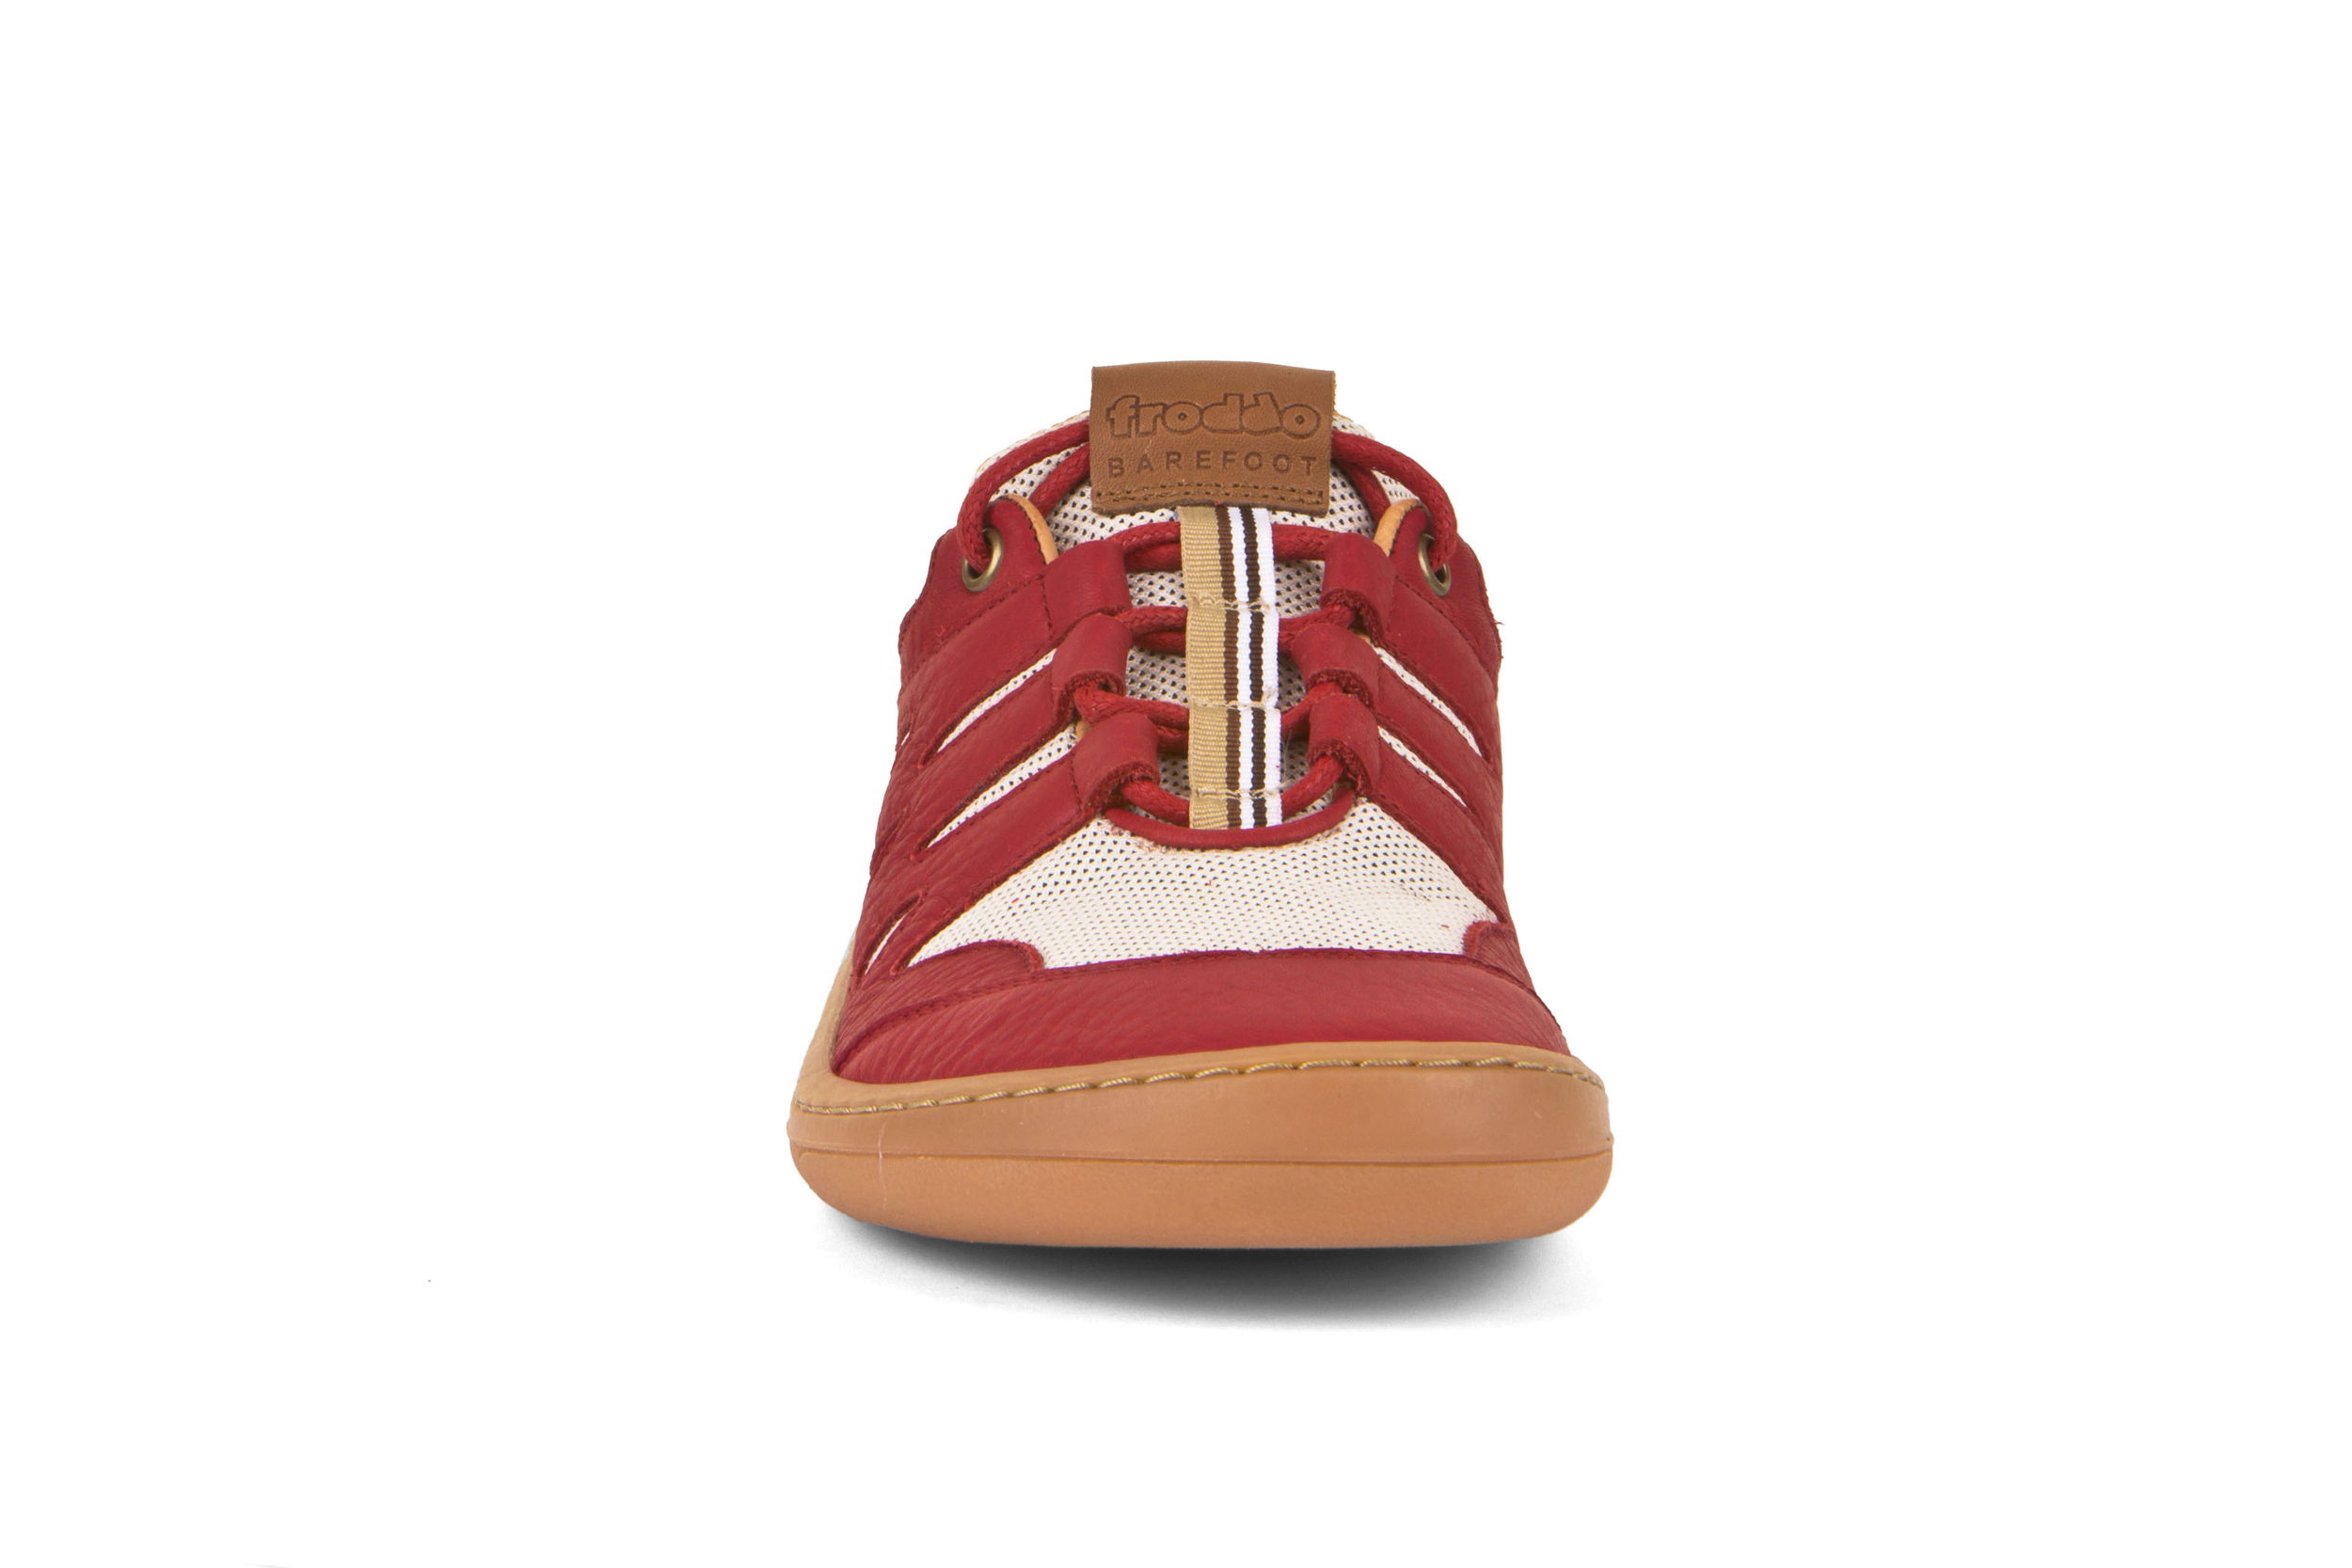 chaussures froddo barefoot freedom rouge sur la boutique liberty pieds-4